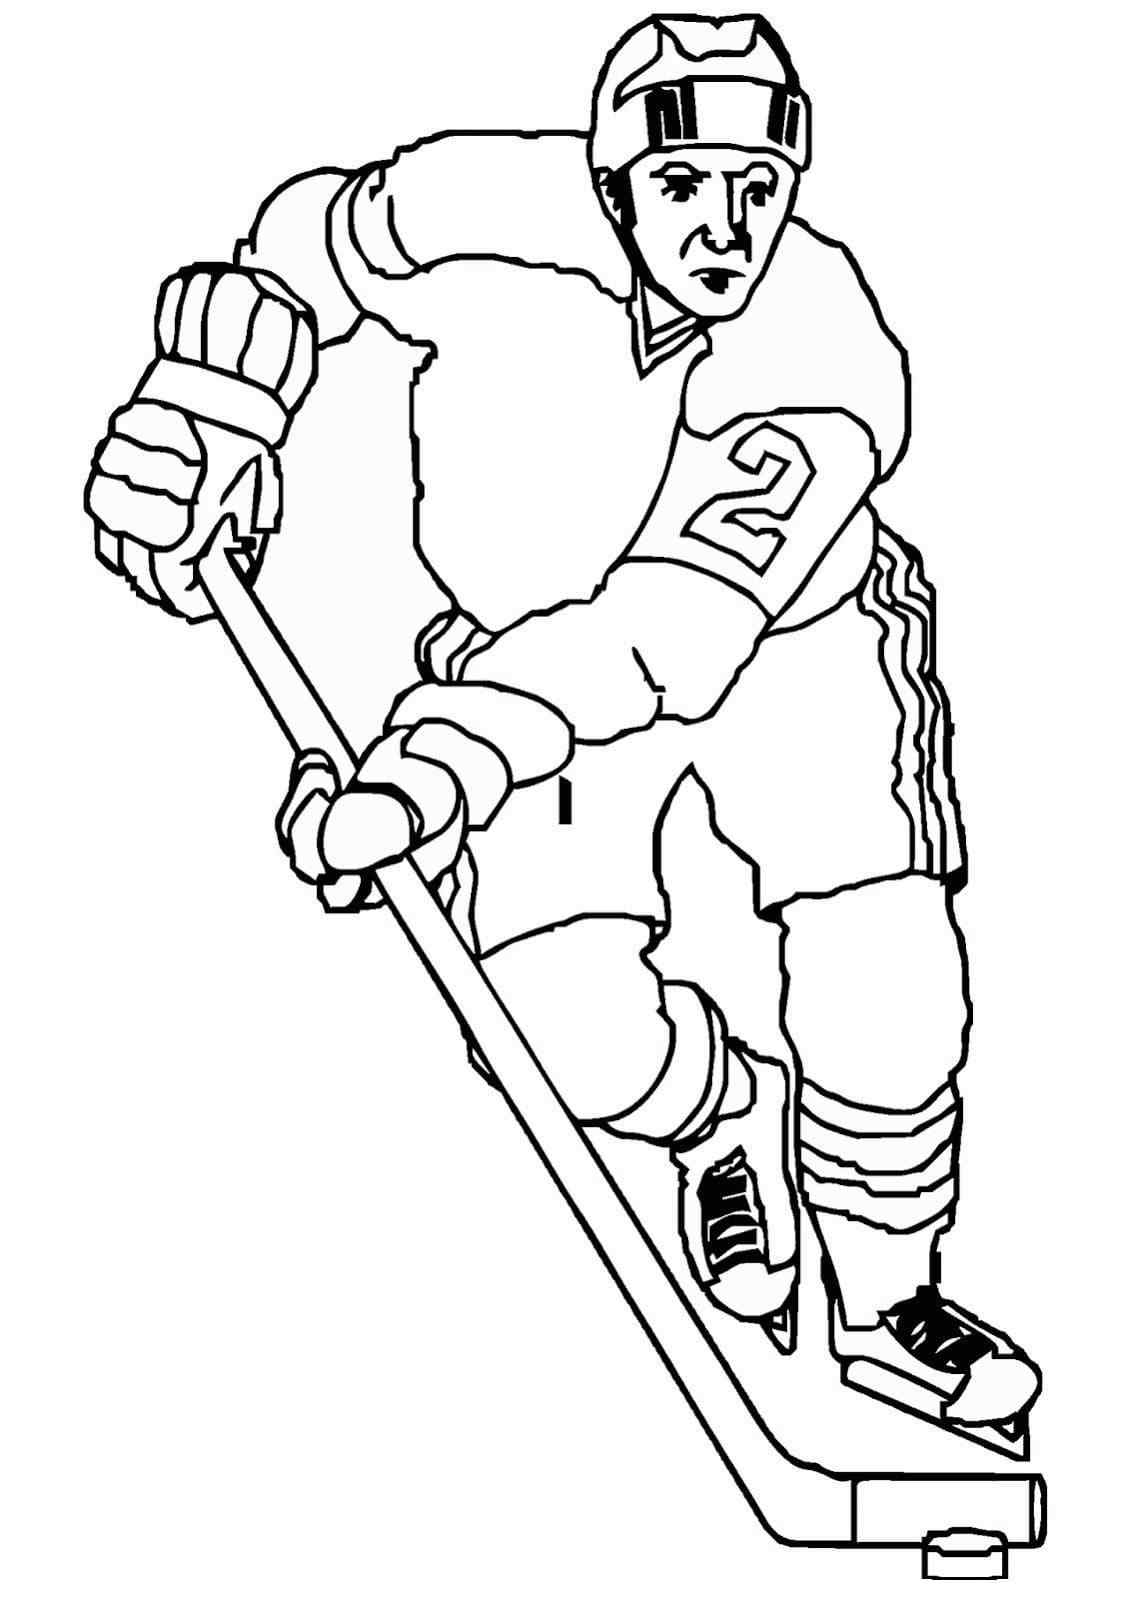 The Attacking Goalkeeper Coloring Page